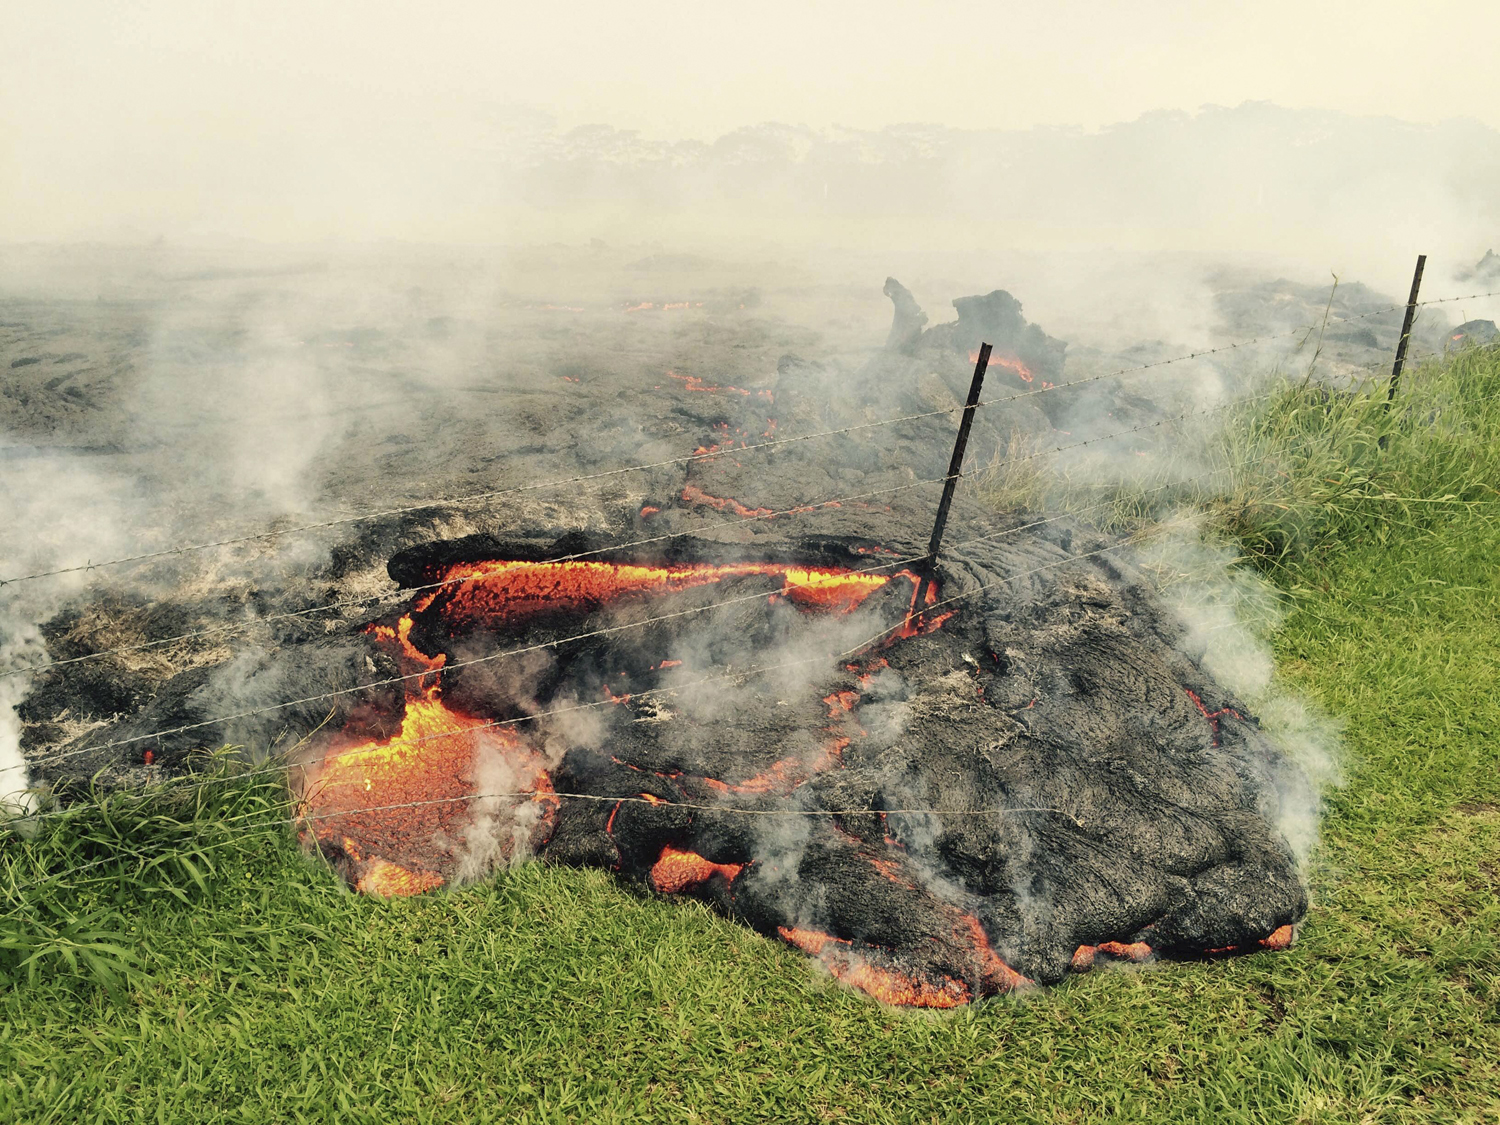 The lava flow from the Kilauea Volcano is seen advancing across a pasture between the Pahoa cemetery and Apa'a Street in this U.S. Geological Survey  image taken near the village of Pahoa, Hawaii on Oct. 25, 2014. (Reuters)